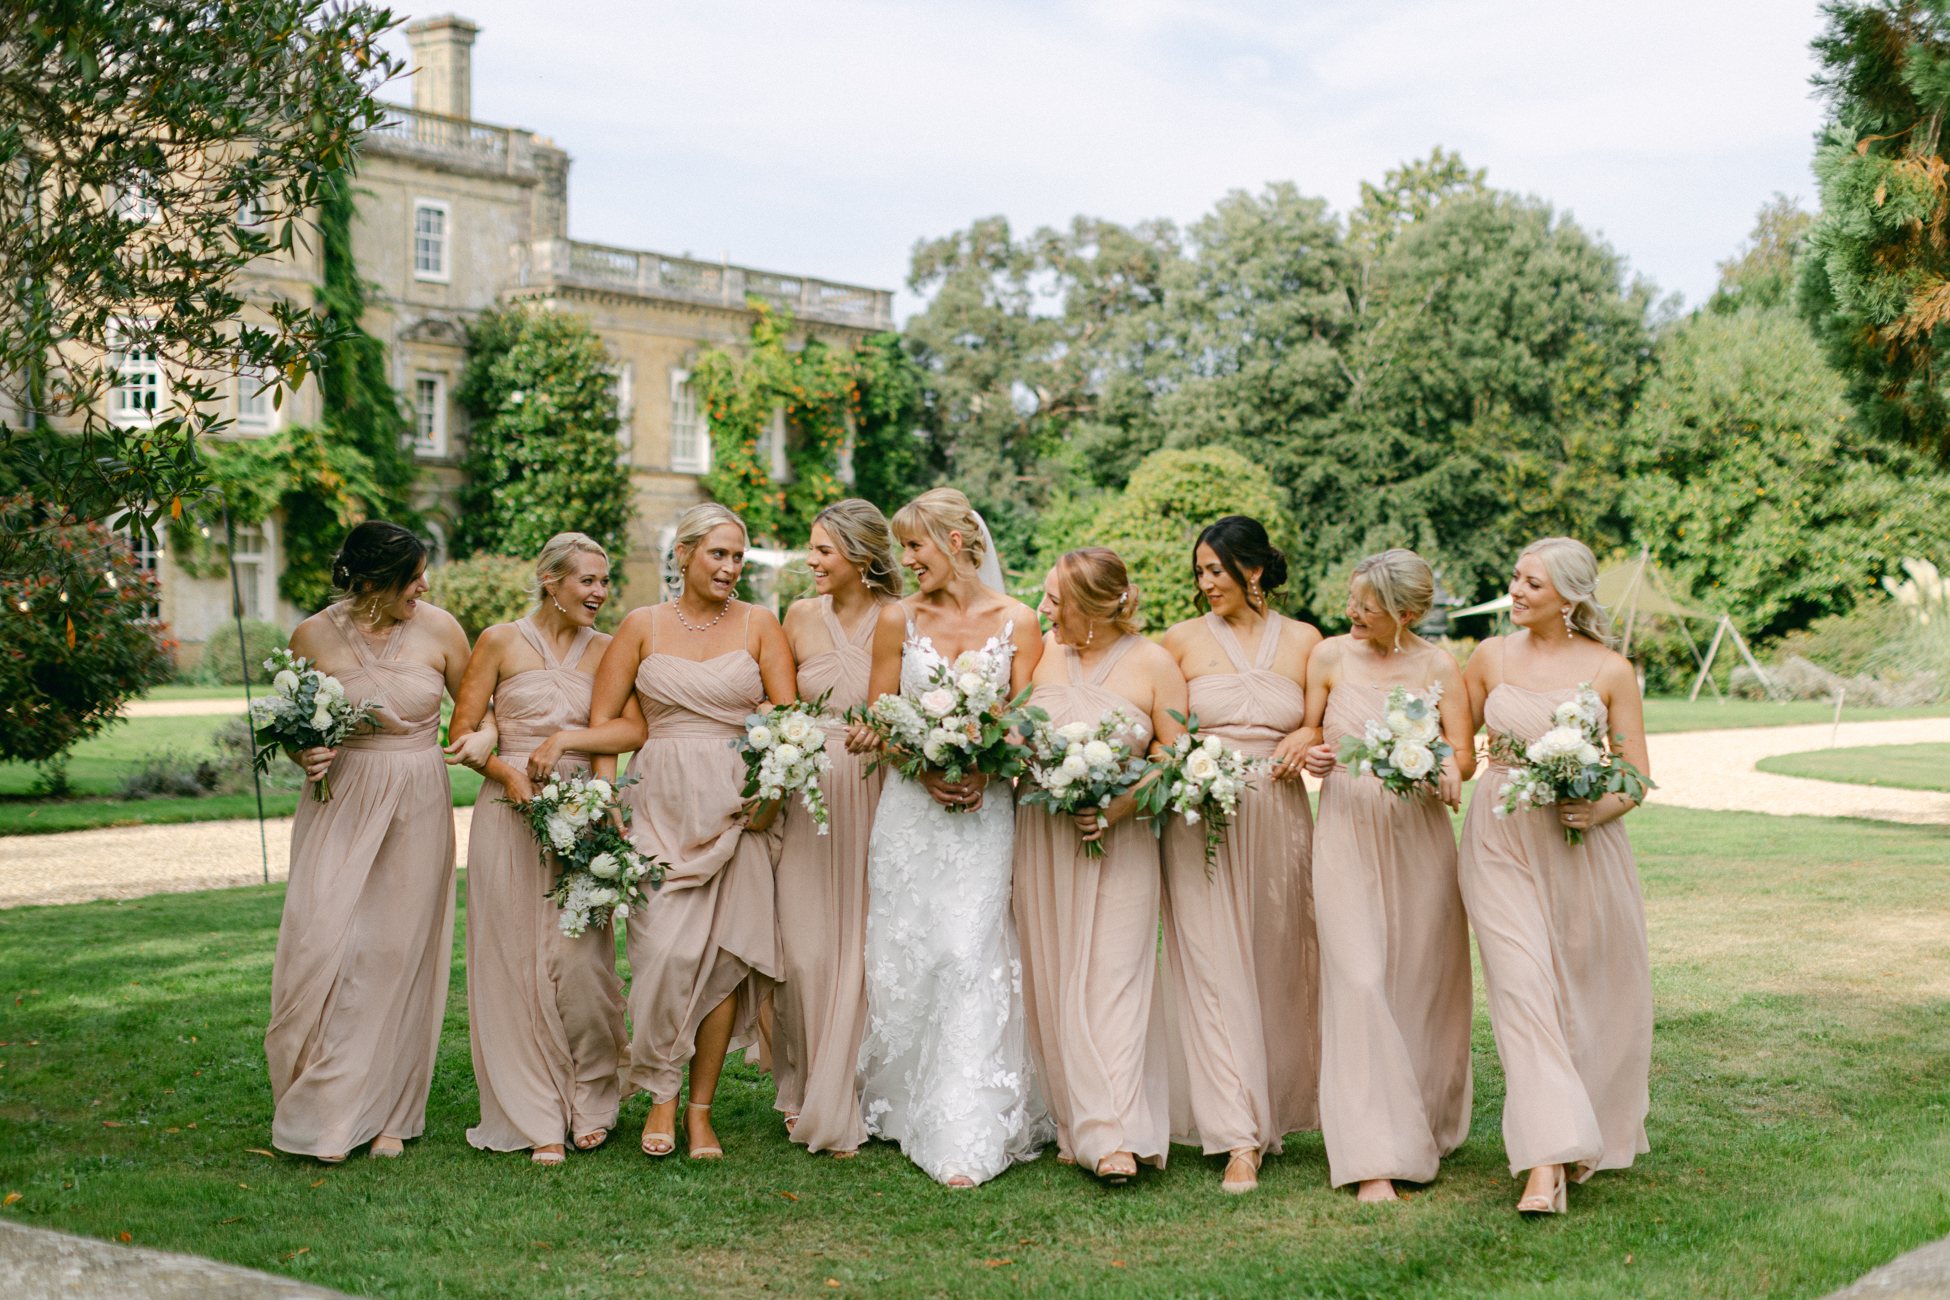 Bridesmaid wearing luxury blush dresses laughing at each other in the grounds of a stately home on a sunny day